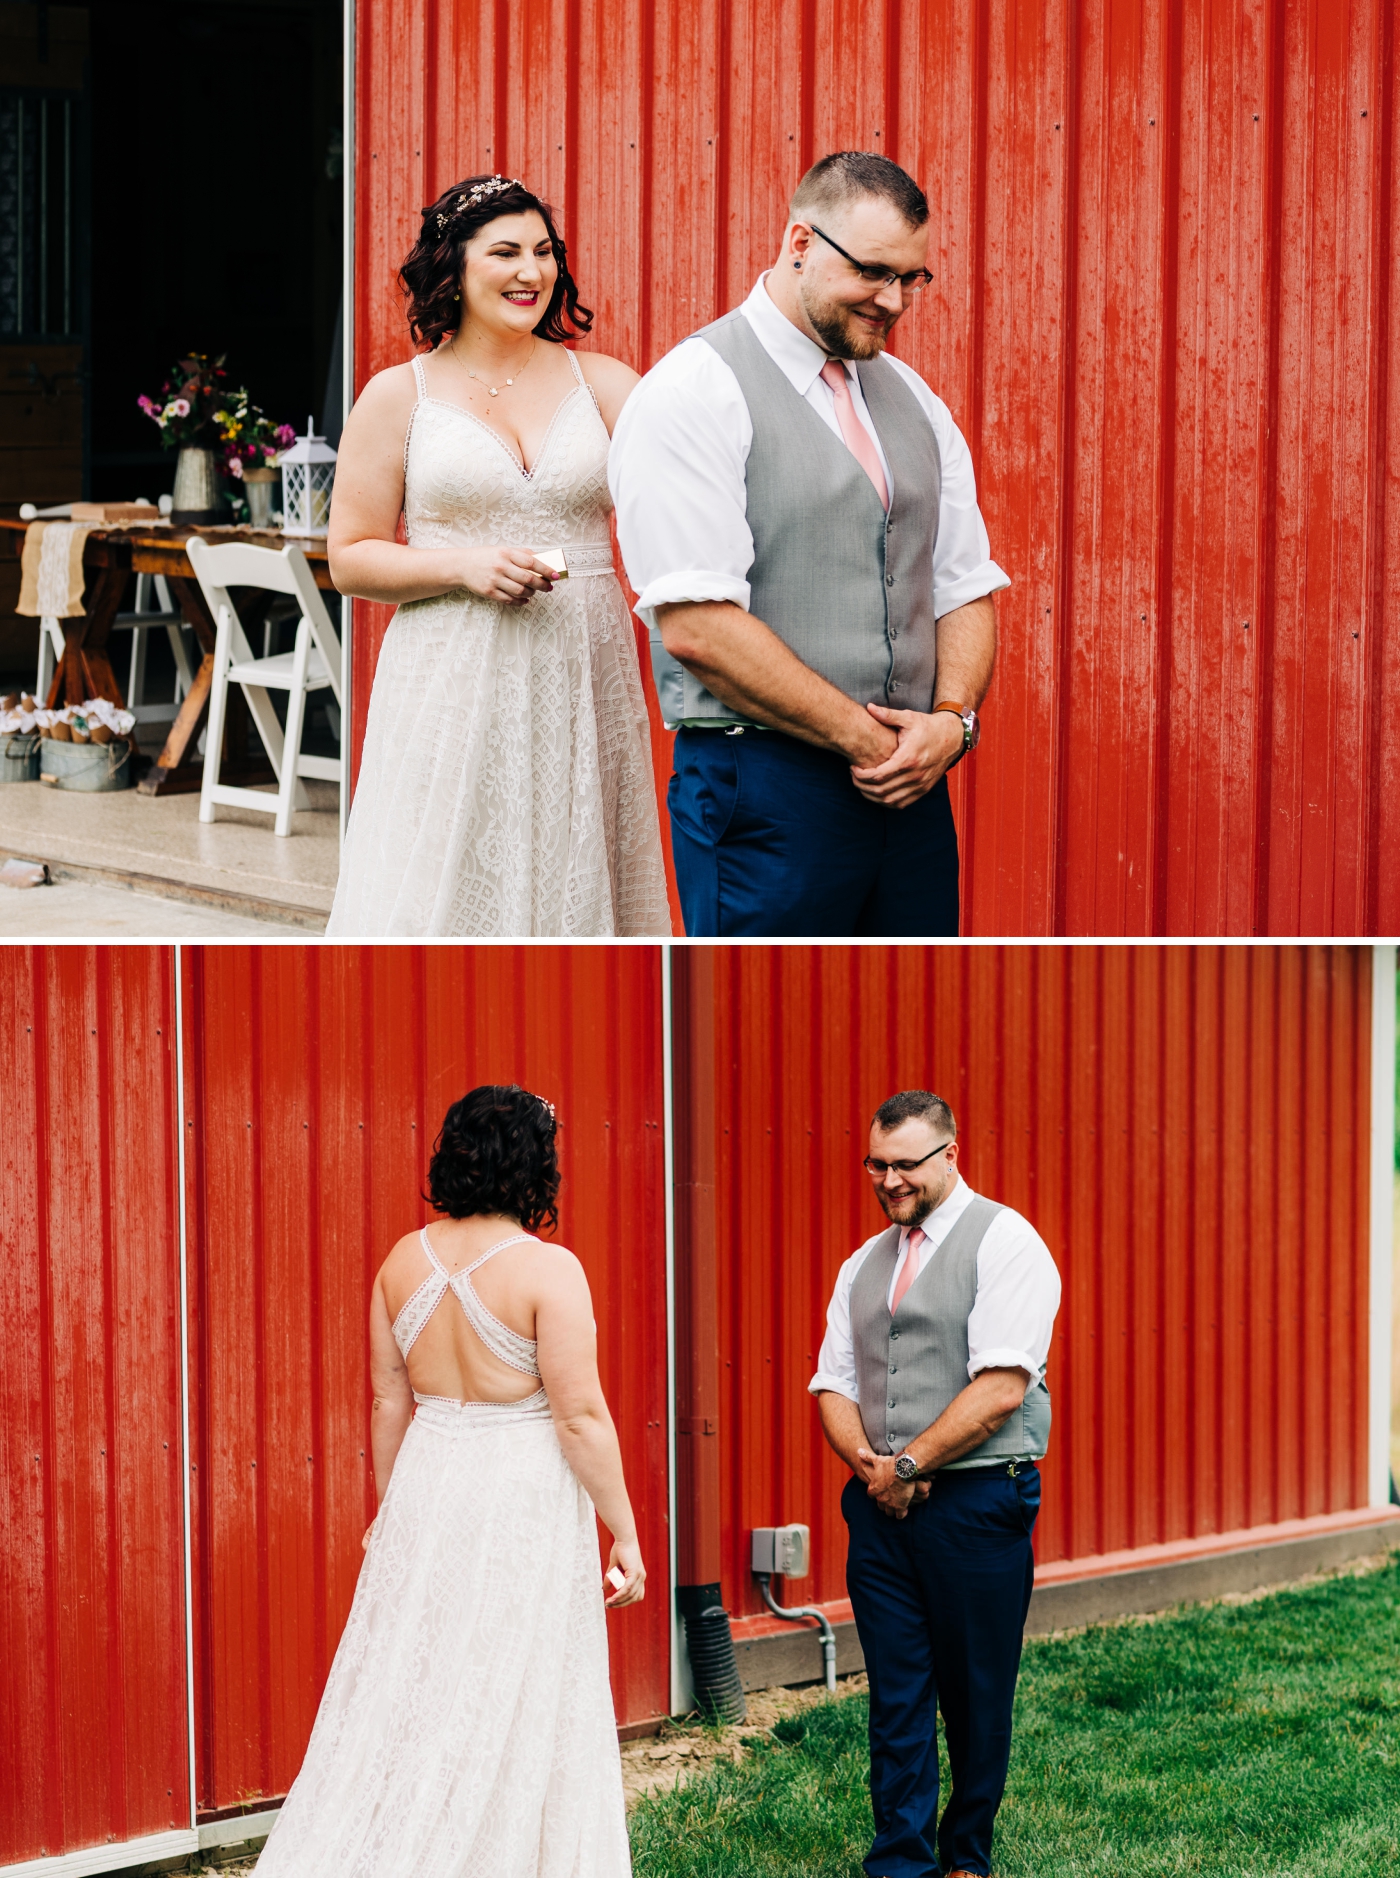 Why You Need a Second Photographer for your wedding day